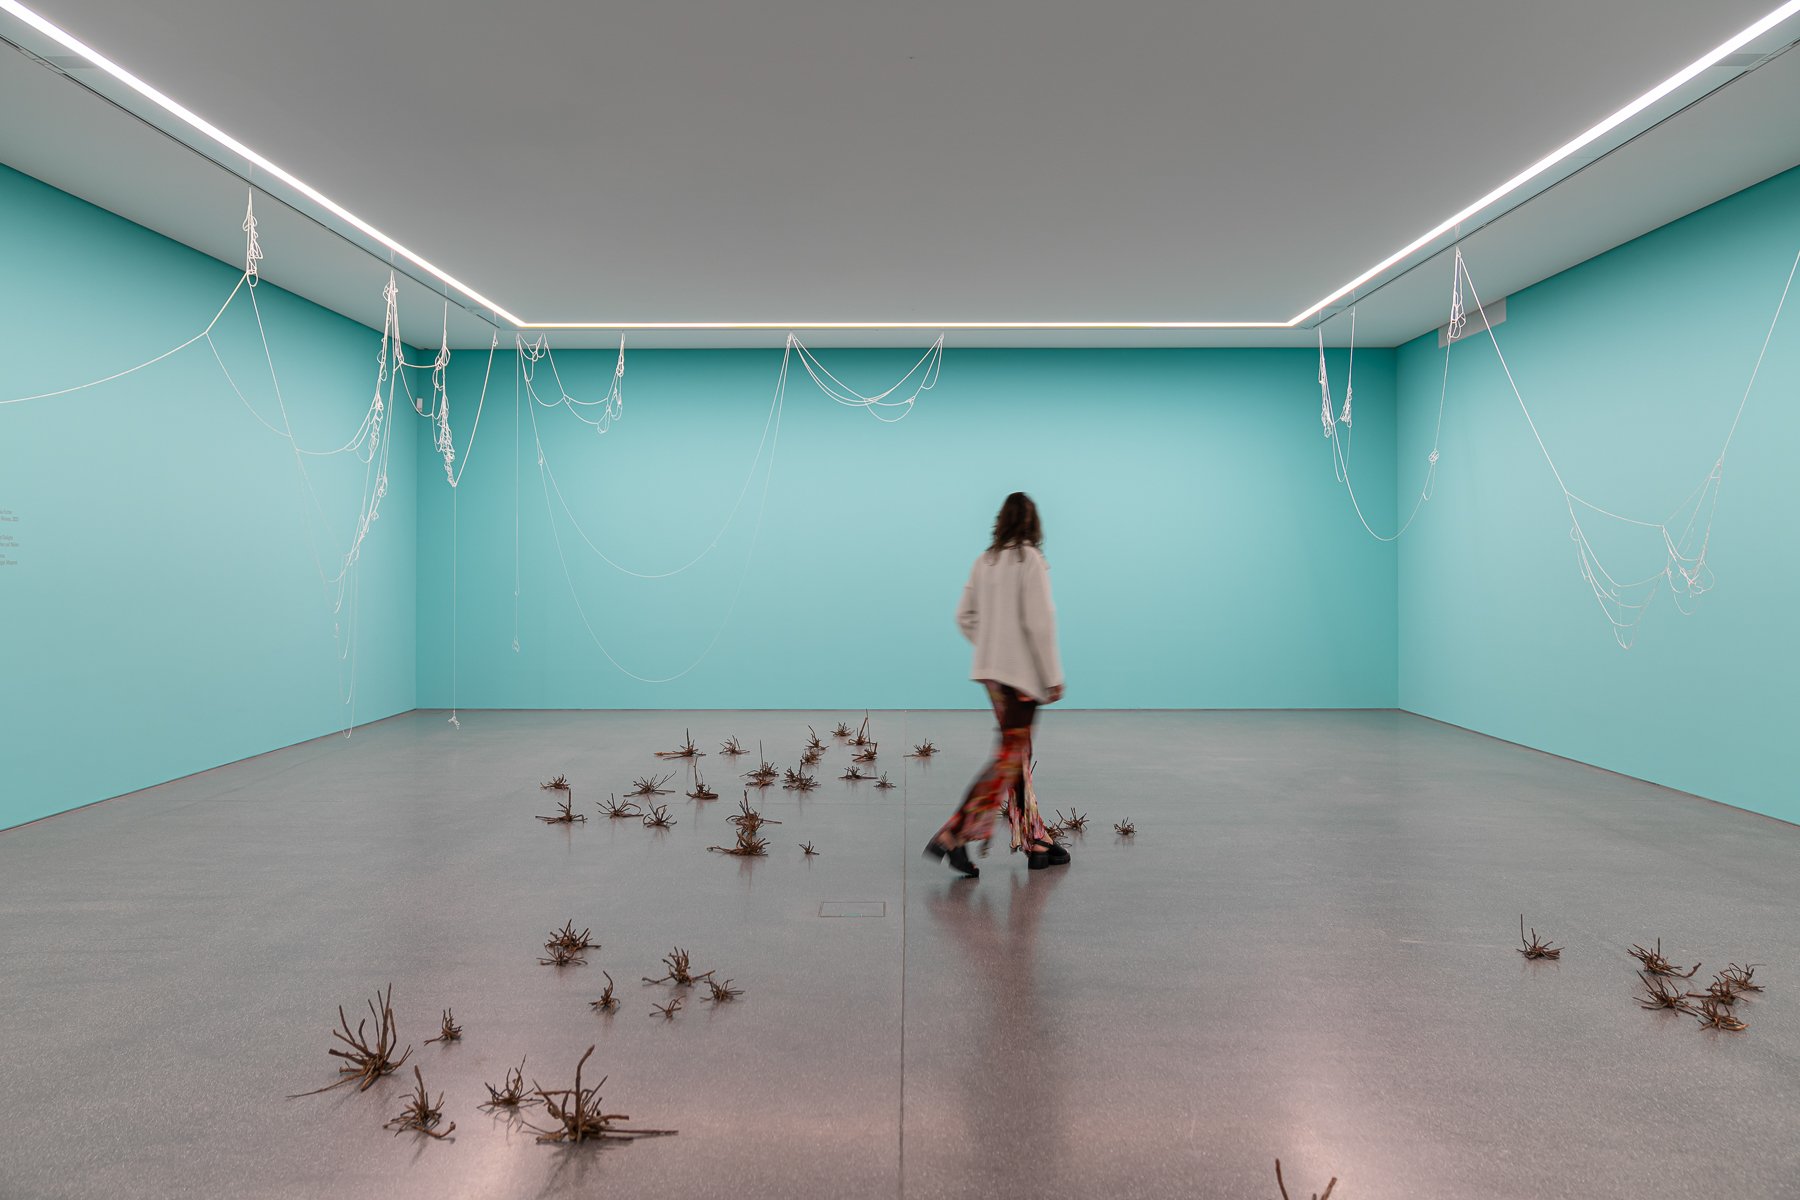  Making Waves   Installation with ‘Atoms of Delight’ (glass beads and nylon thread), ‘Small Fires’(nails and magnets) and wall paint  at Bündner Kunstmuseum, Chur  Fotocredit: Yanik Bürkli, on the picture: Lika Nüssli 